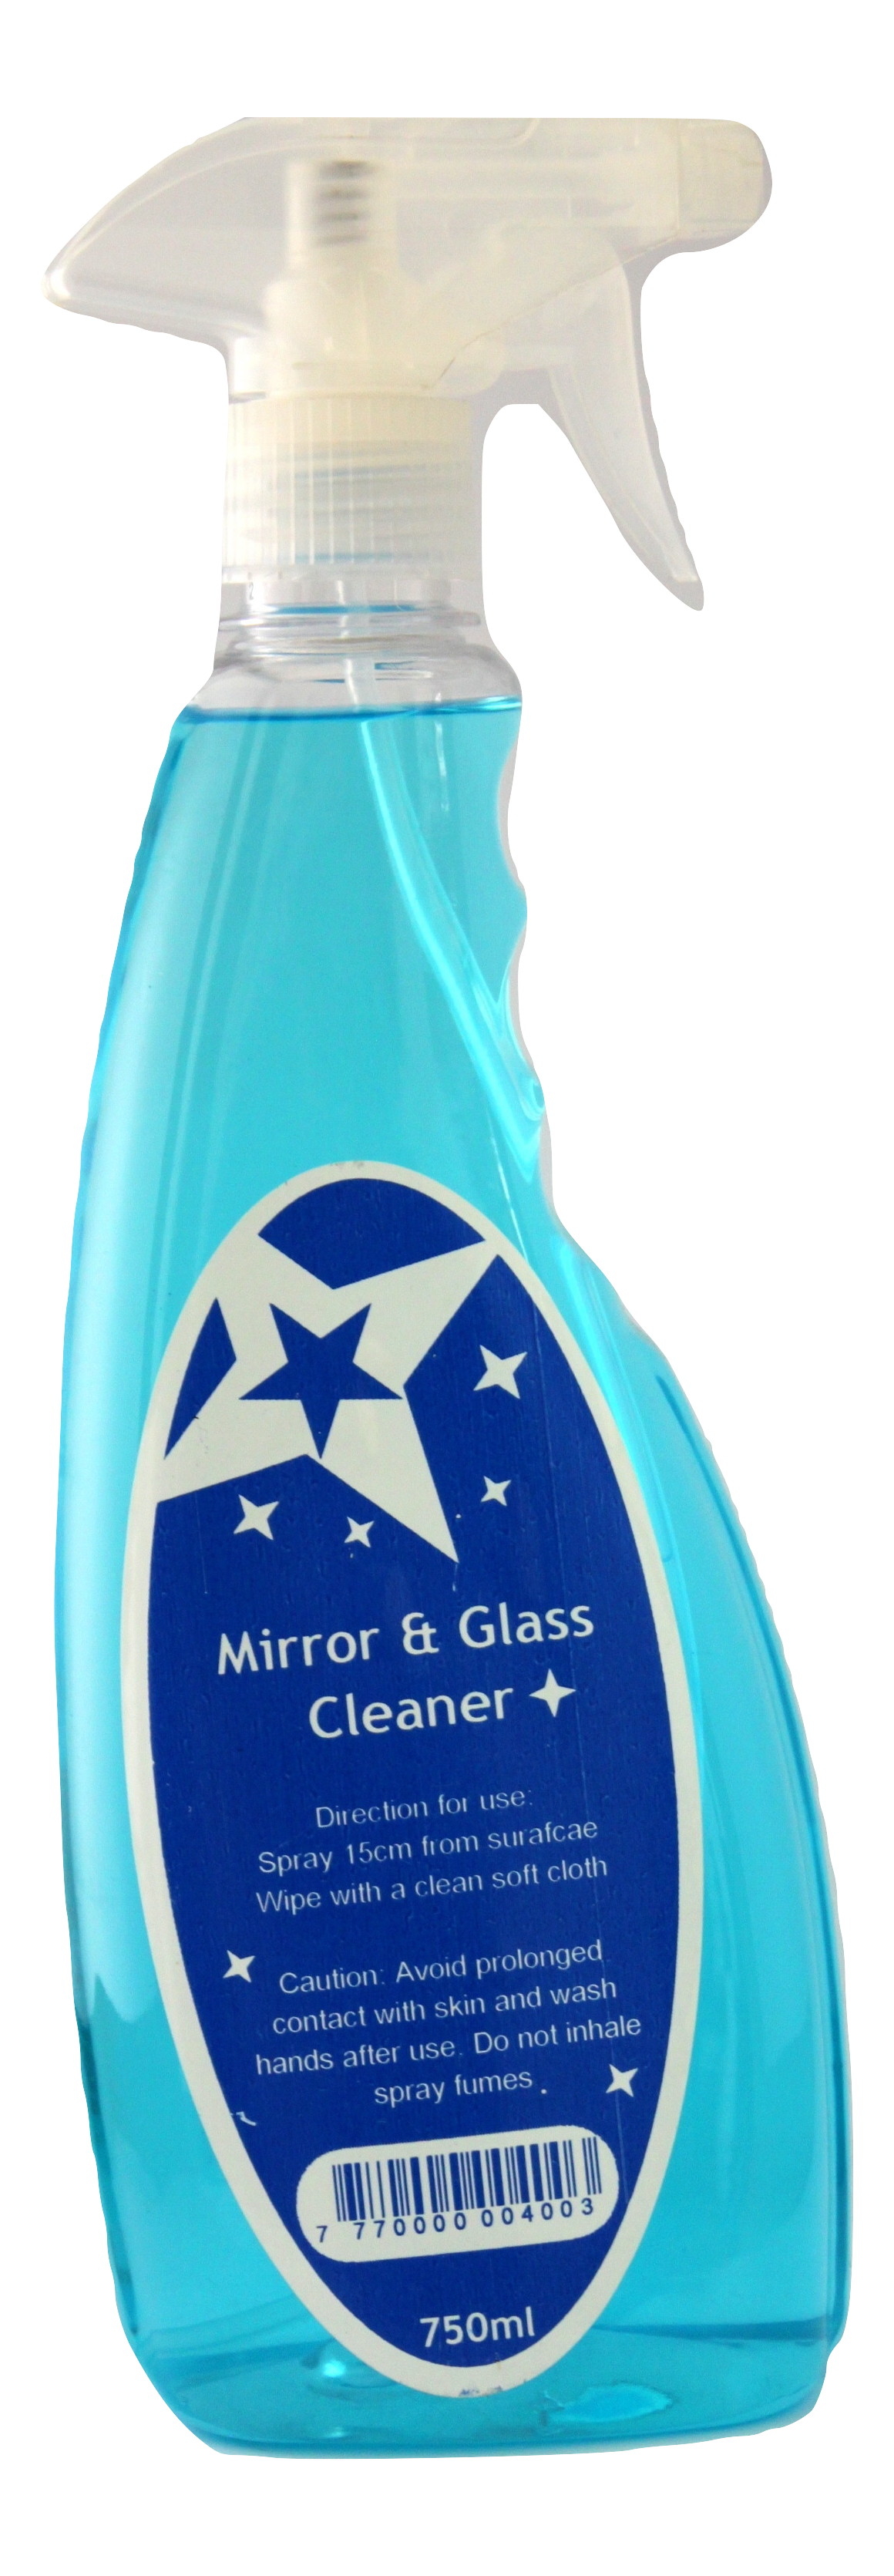 mirror-and-glass-cleaner